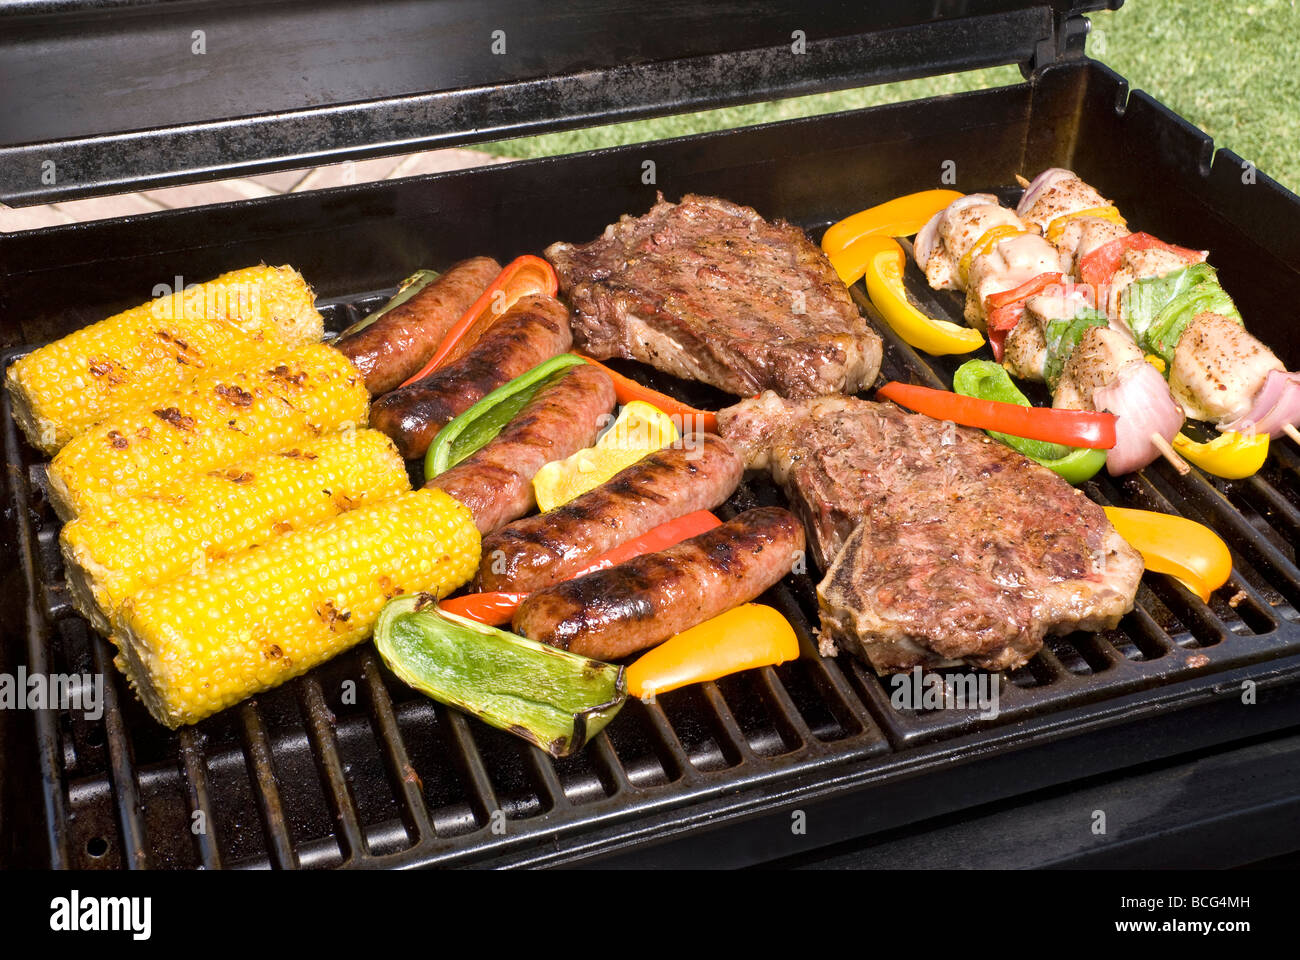 A barbecue spread of corn on the cob bratwurst steak sirloin fillets and chicken kebabs Stock Photo